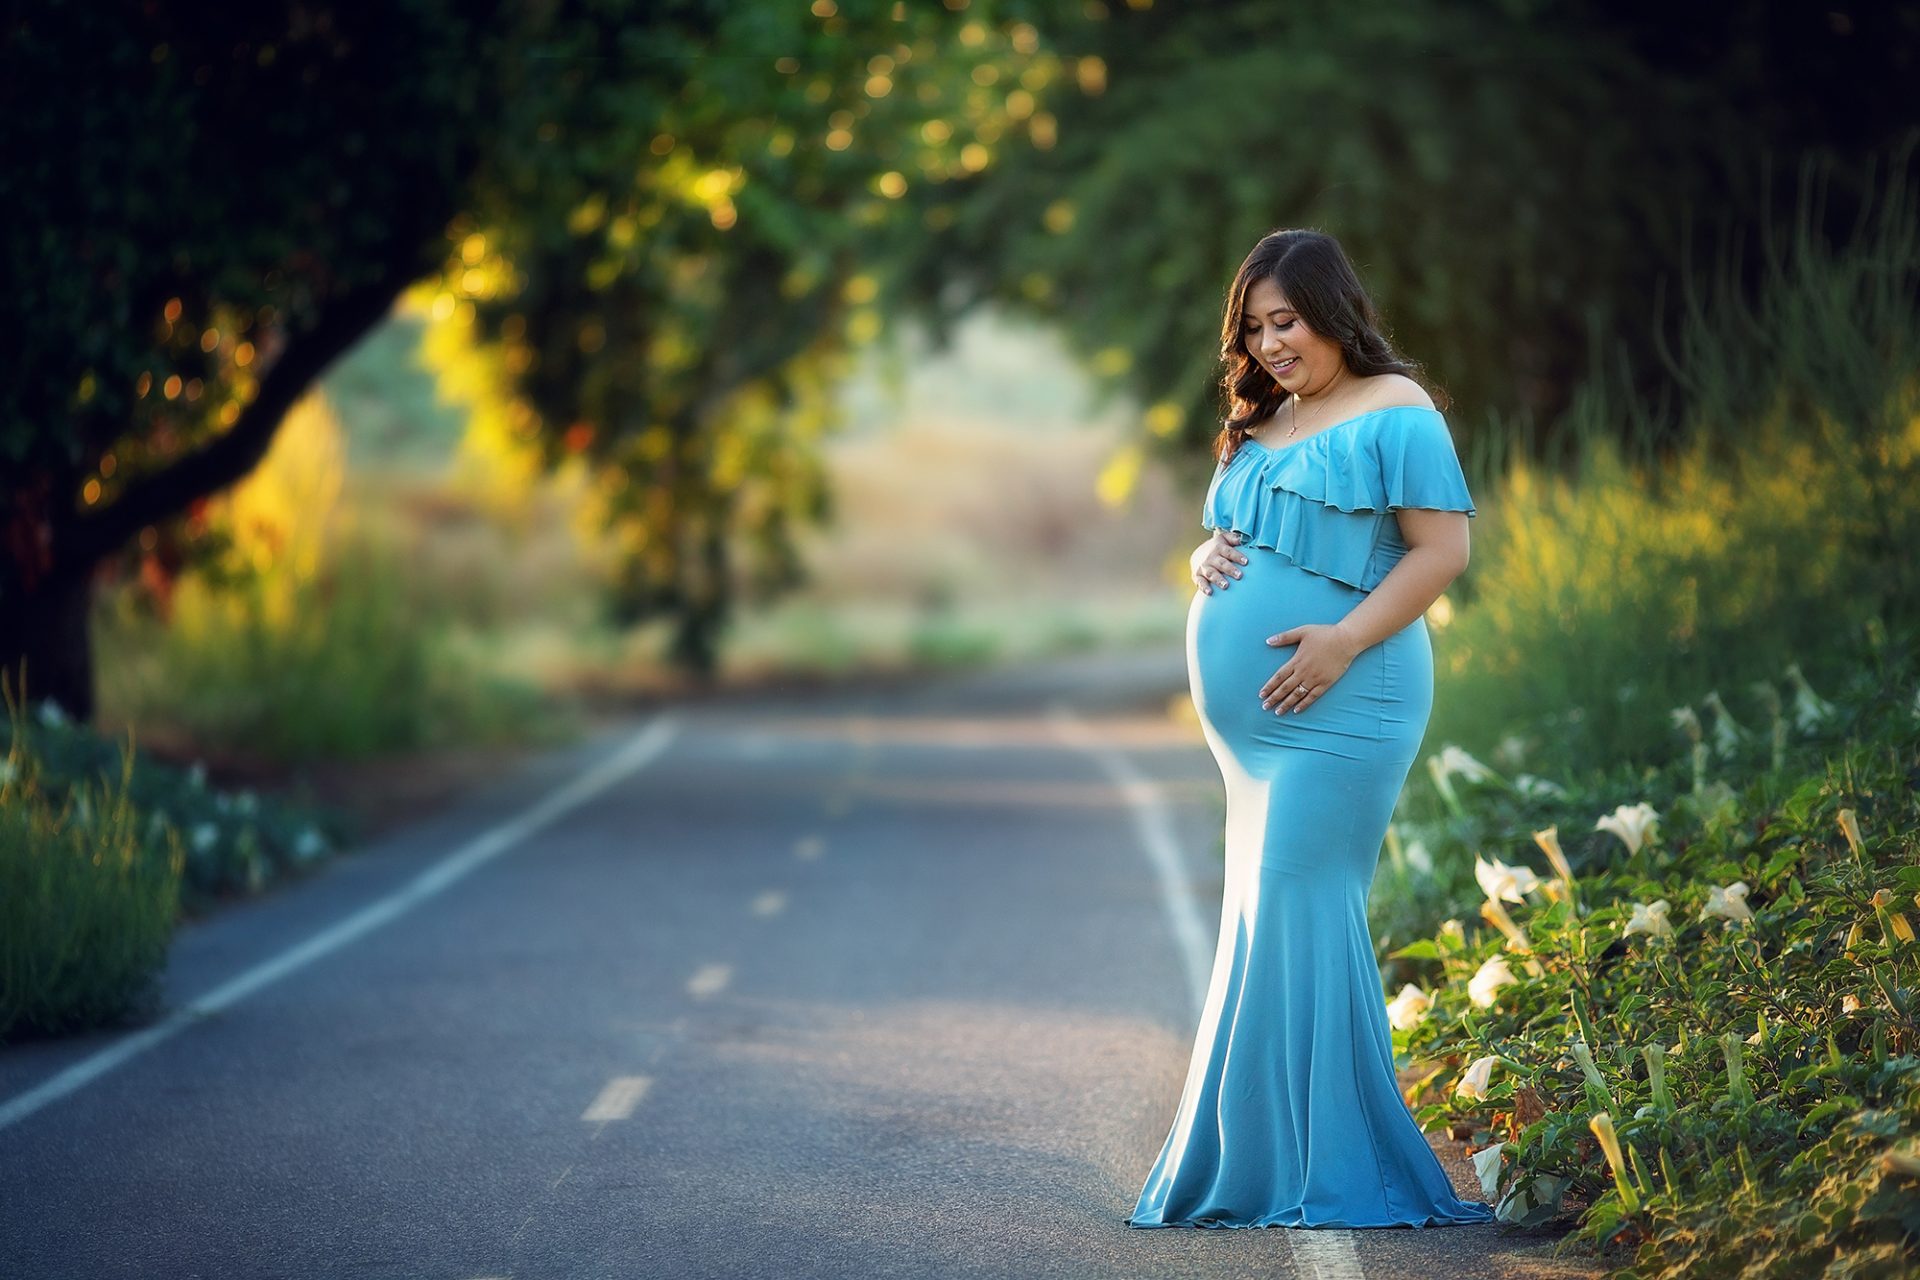 Sweet Words About Emily Marie maternity photography